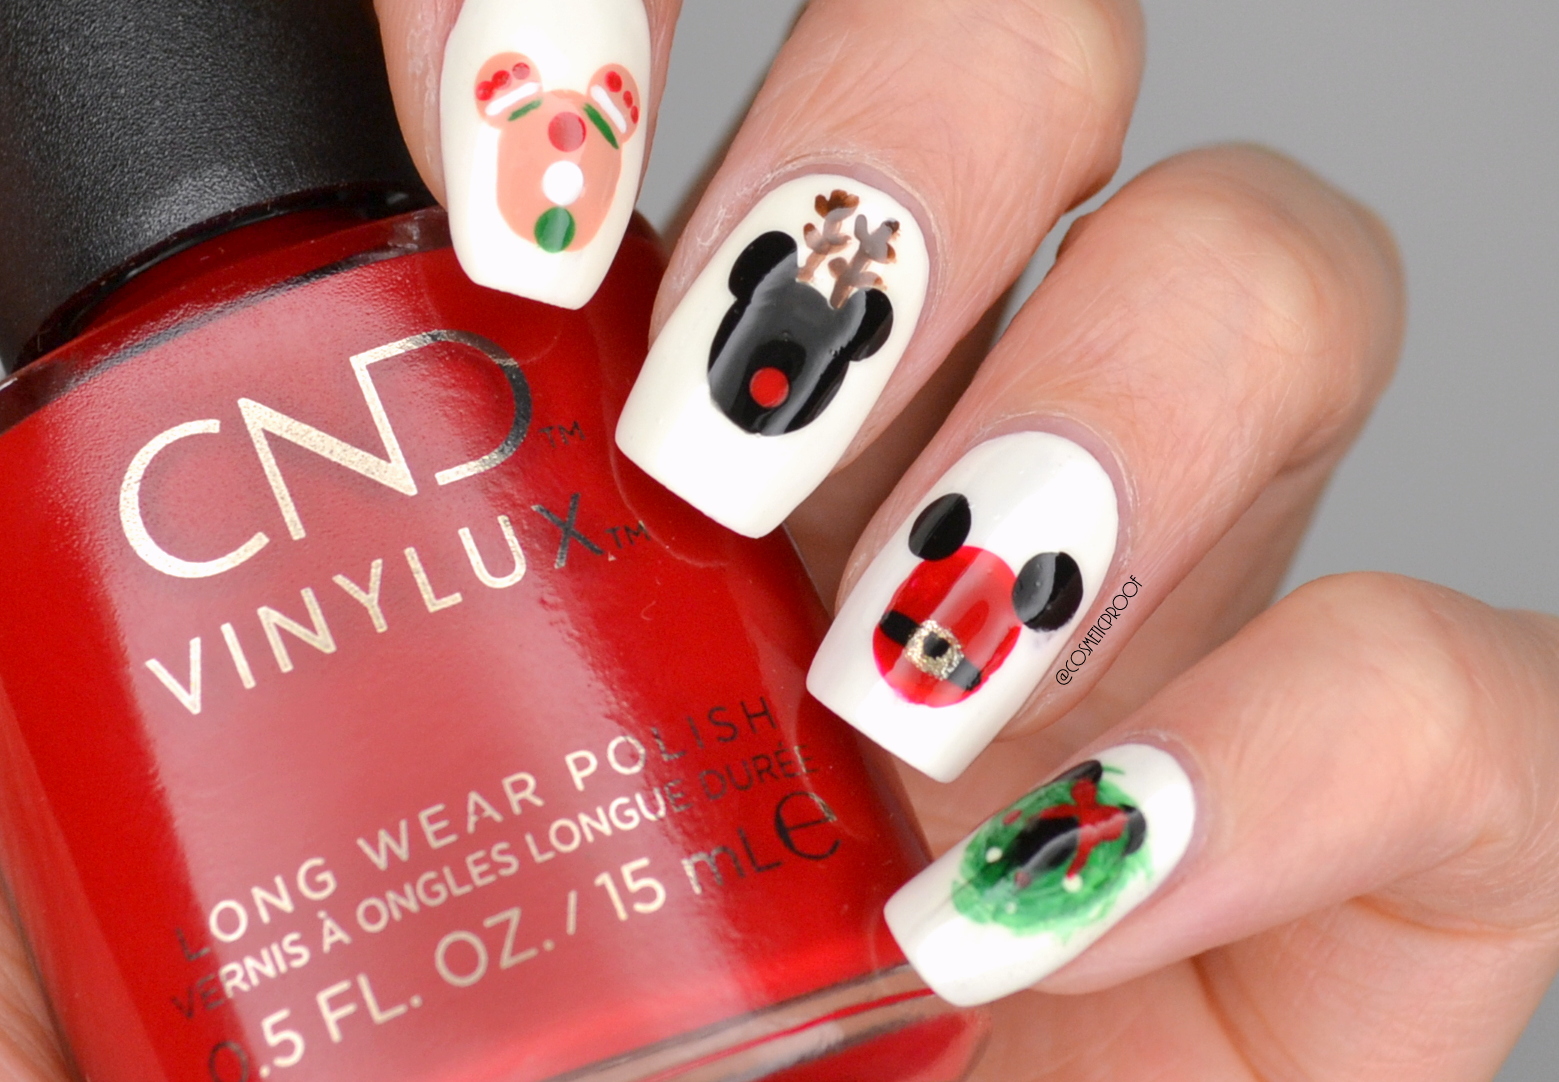 9. "Oh My Disney" Nail Art Videos by YouTube - wide 3